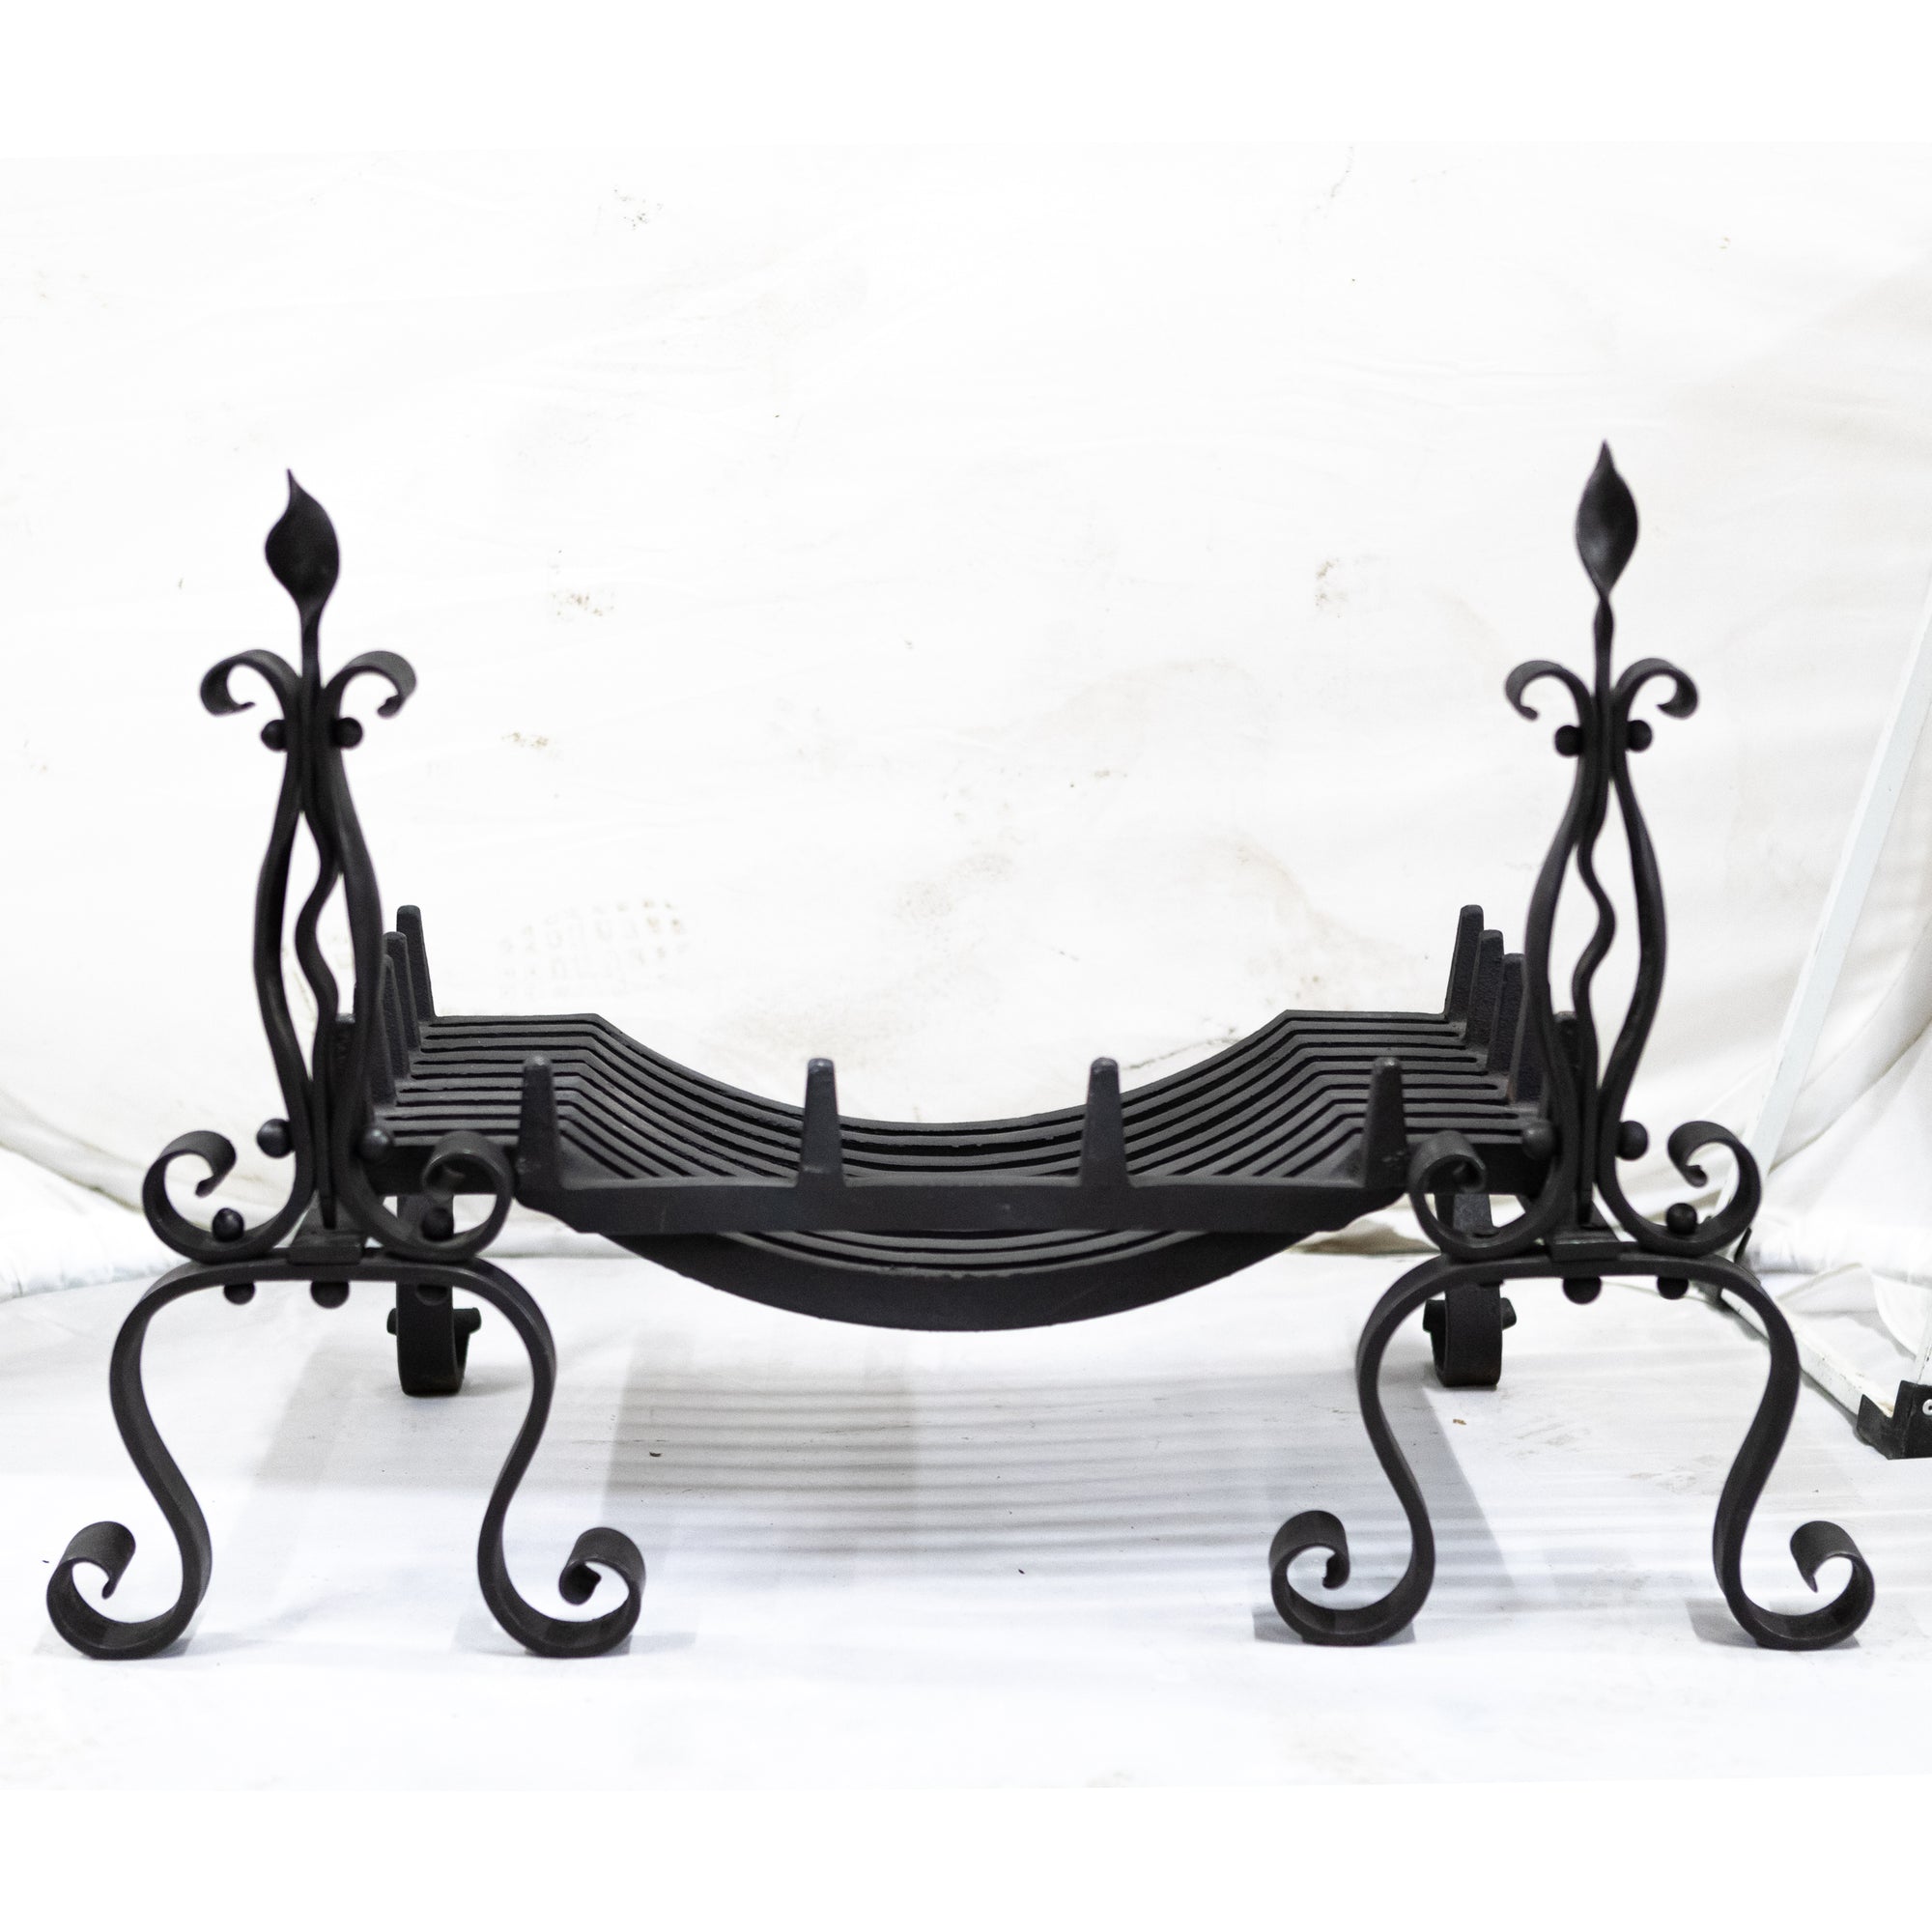 Ornate Antique Wrought Iron Firedogs | The Architectural Forum